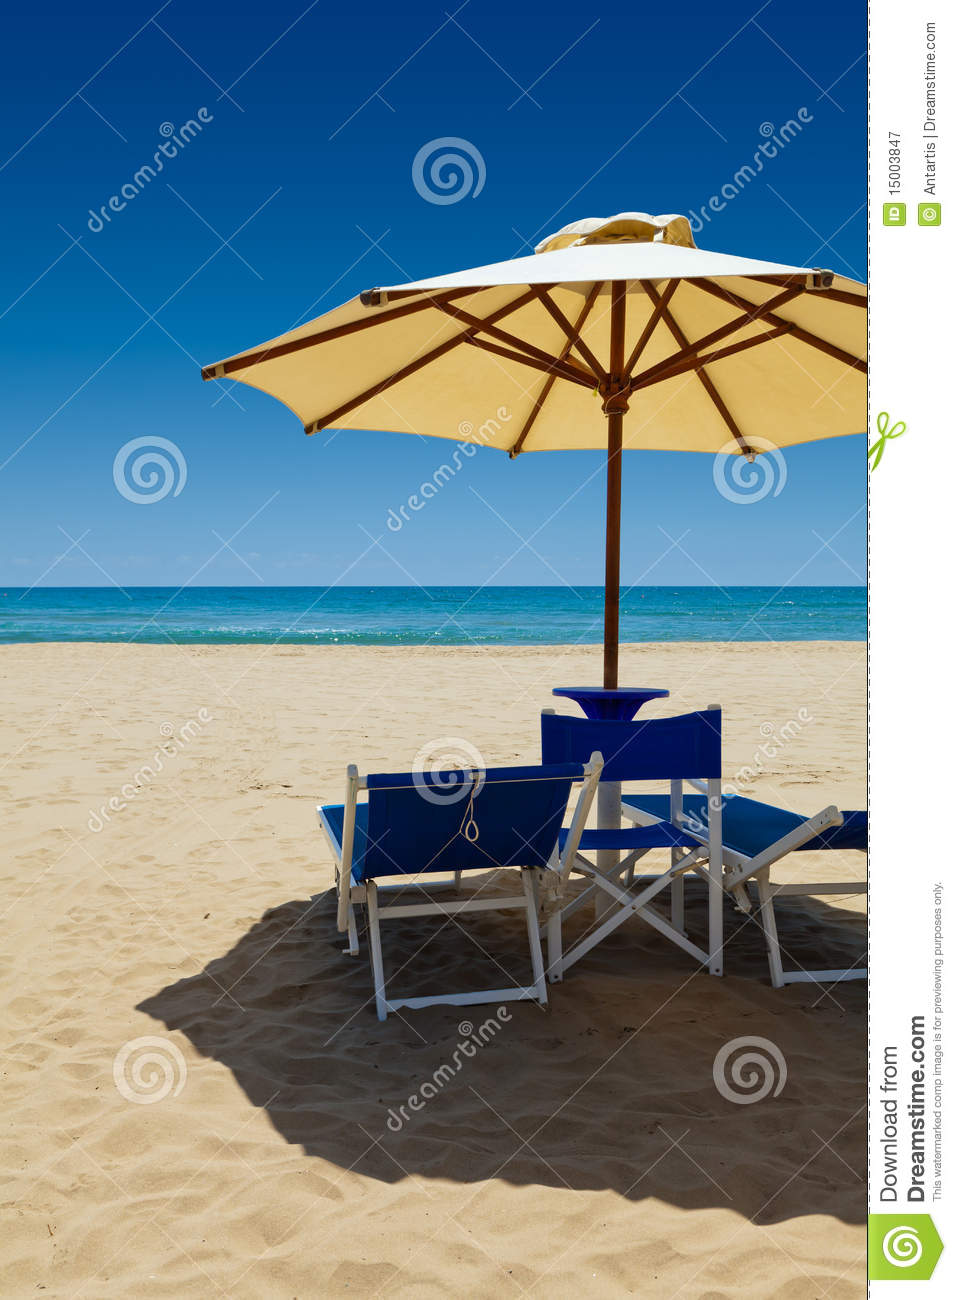 Deck Chairs Under An Umbrella Royalty Free Stock Photography   Image